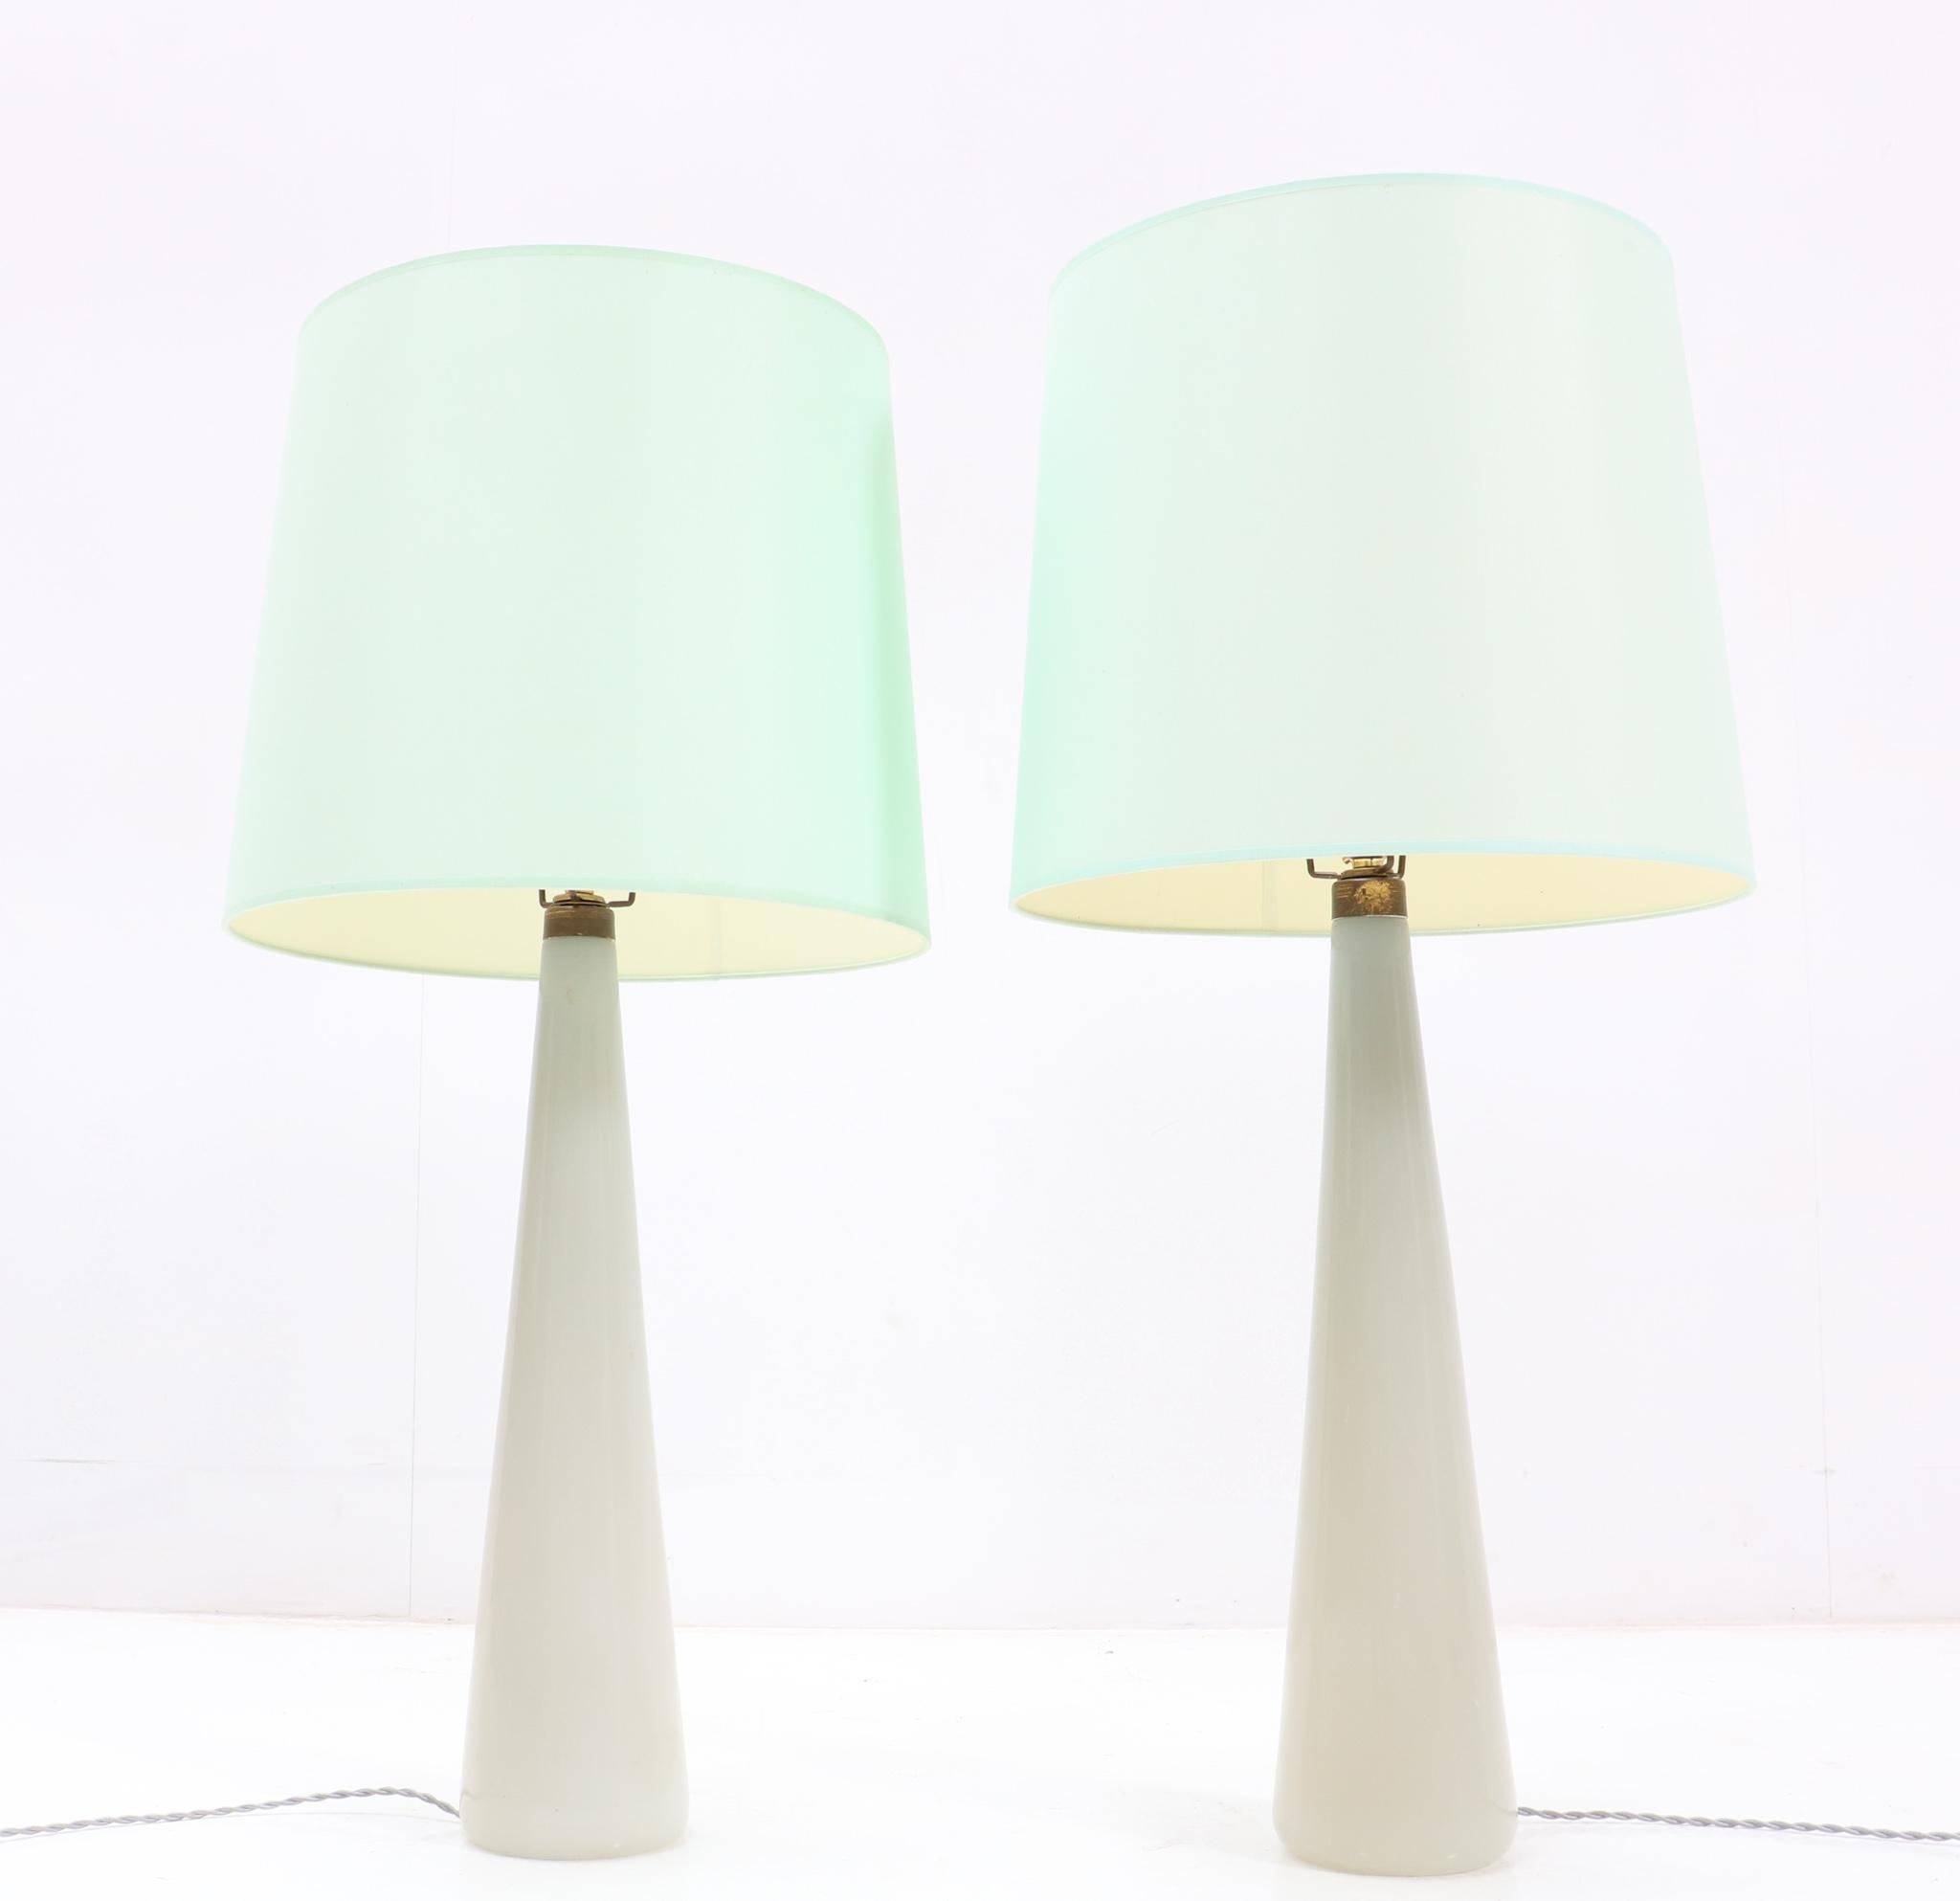 Magnificent pair of two Mid-Century Modern table lamps.
Design by Archimede Seguso Murano.
Striking Italian design from the 1970s.
Green and white Murano glass alabastro ovoid lamp bases with new green shades.
Marked with original manufacturers